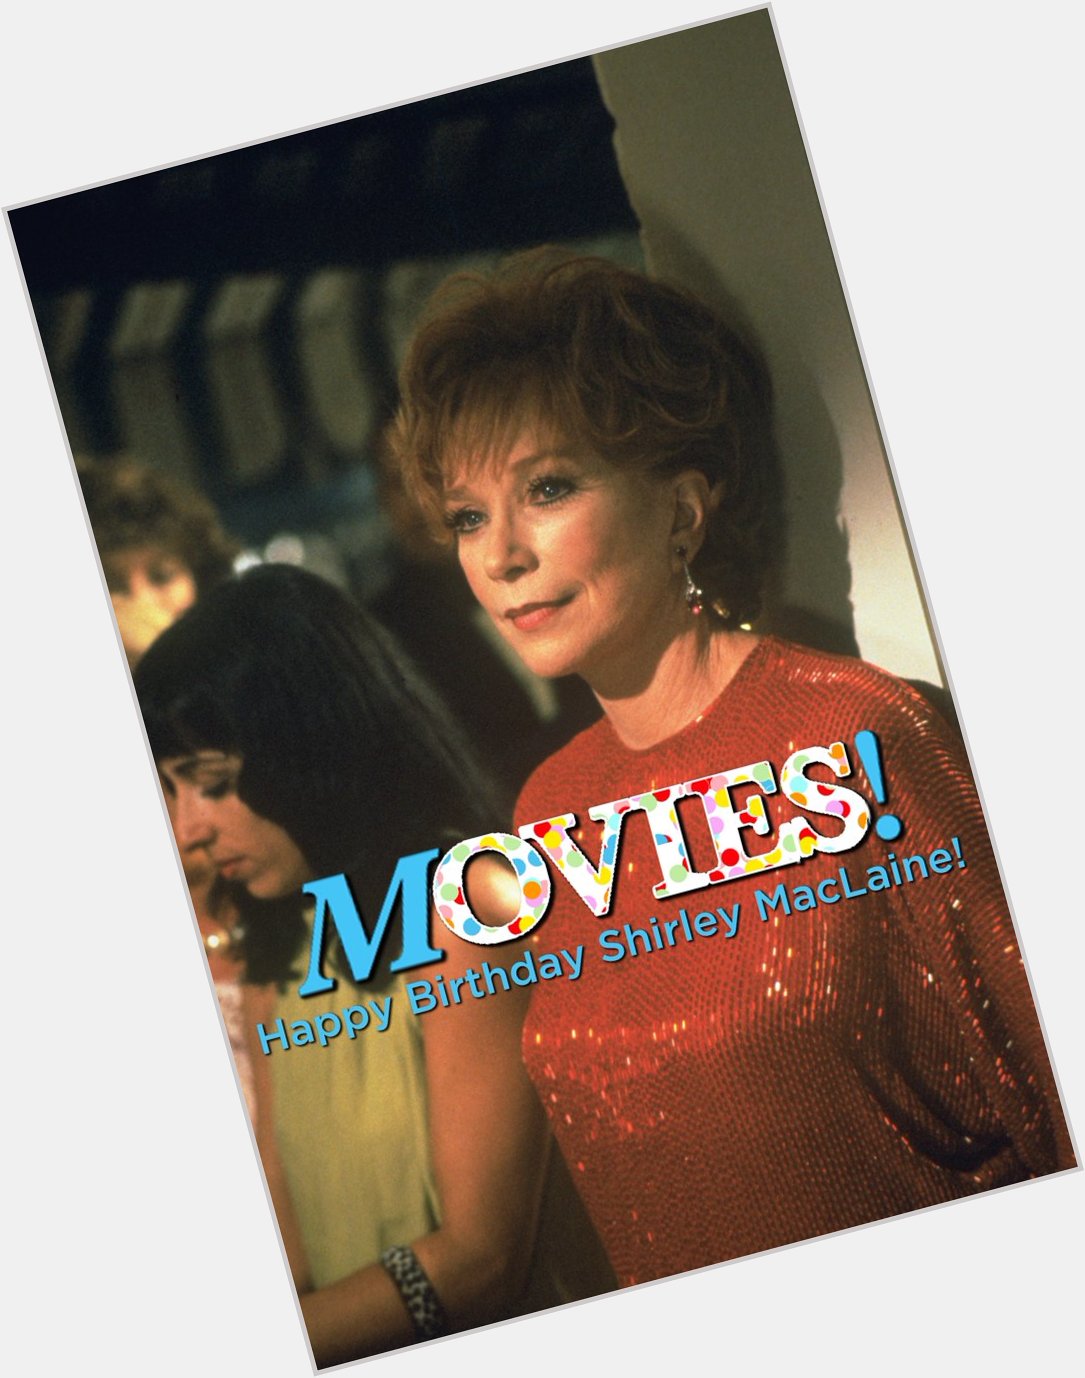 Happy Birthday Shirley MacLaine!

Know what film this is from? 